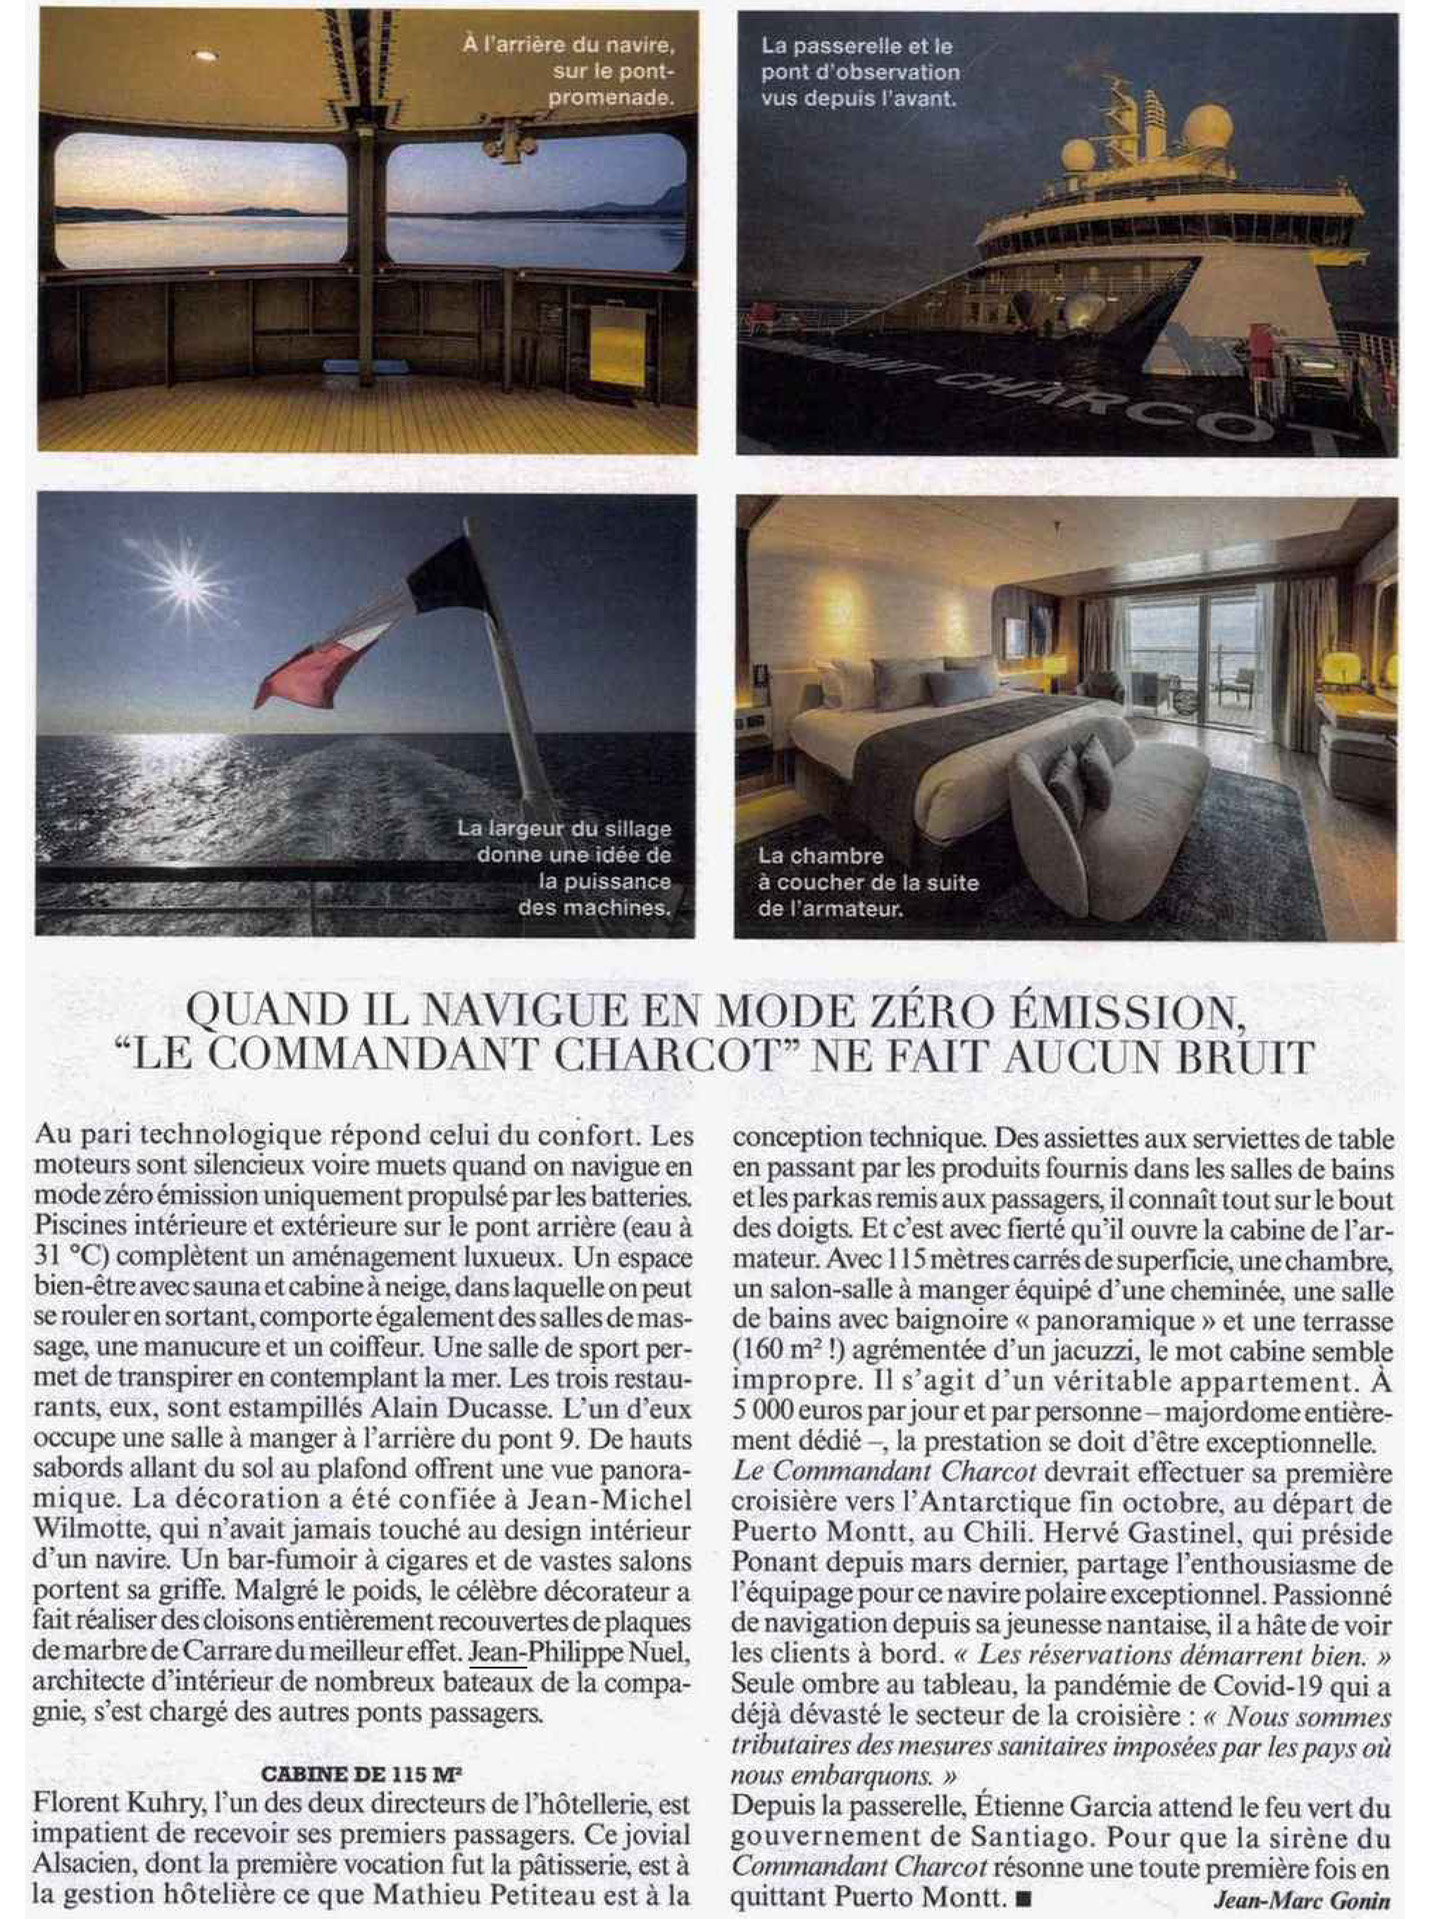 article on commander charcot of ponant in figaro magazine, interior design by jean-philippe nuel, luxury polar expedition ship, cruise, luxury ship, interior design